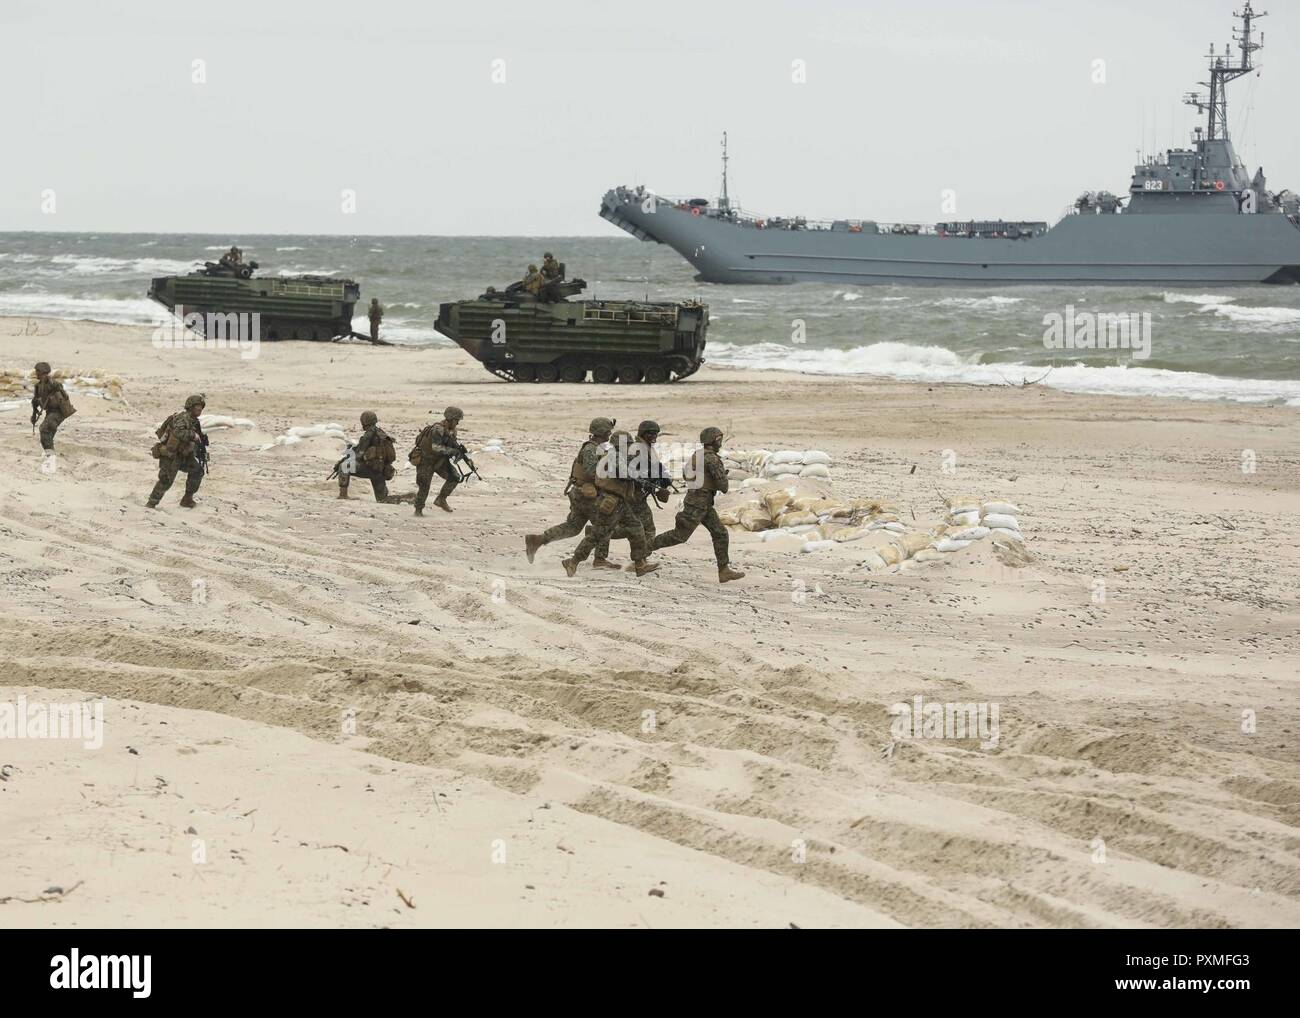 USTKA, Poland (June 14, 2017) U.S. Marines assigned to Marine Forces Europe-Africa participate in an amphibious landing demonstration during exercise BALTOPS 2017. The premier annual maritime-focused exercise is conducted in the Baltic region and is one of the largest exercises in Northern Europe. Stock Photo